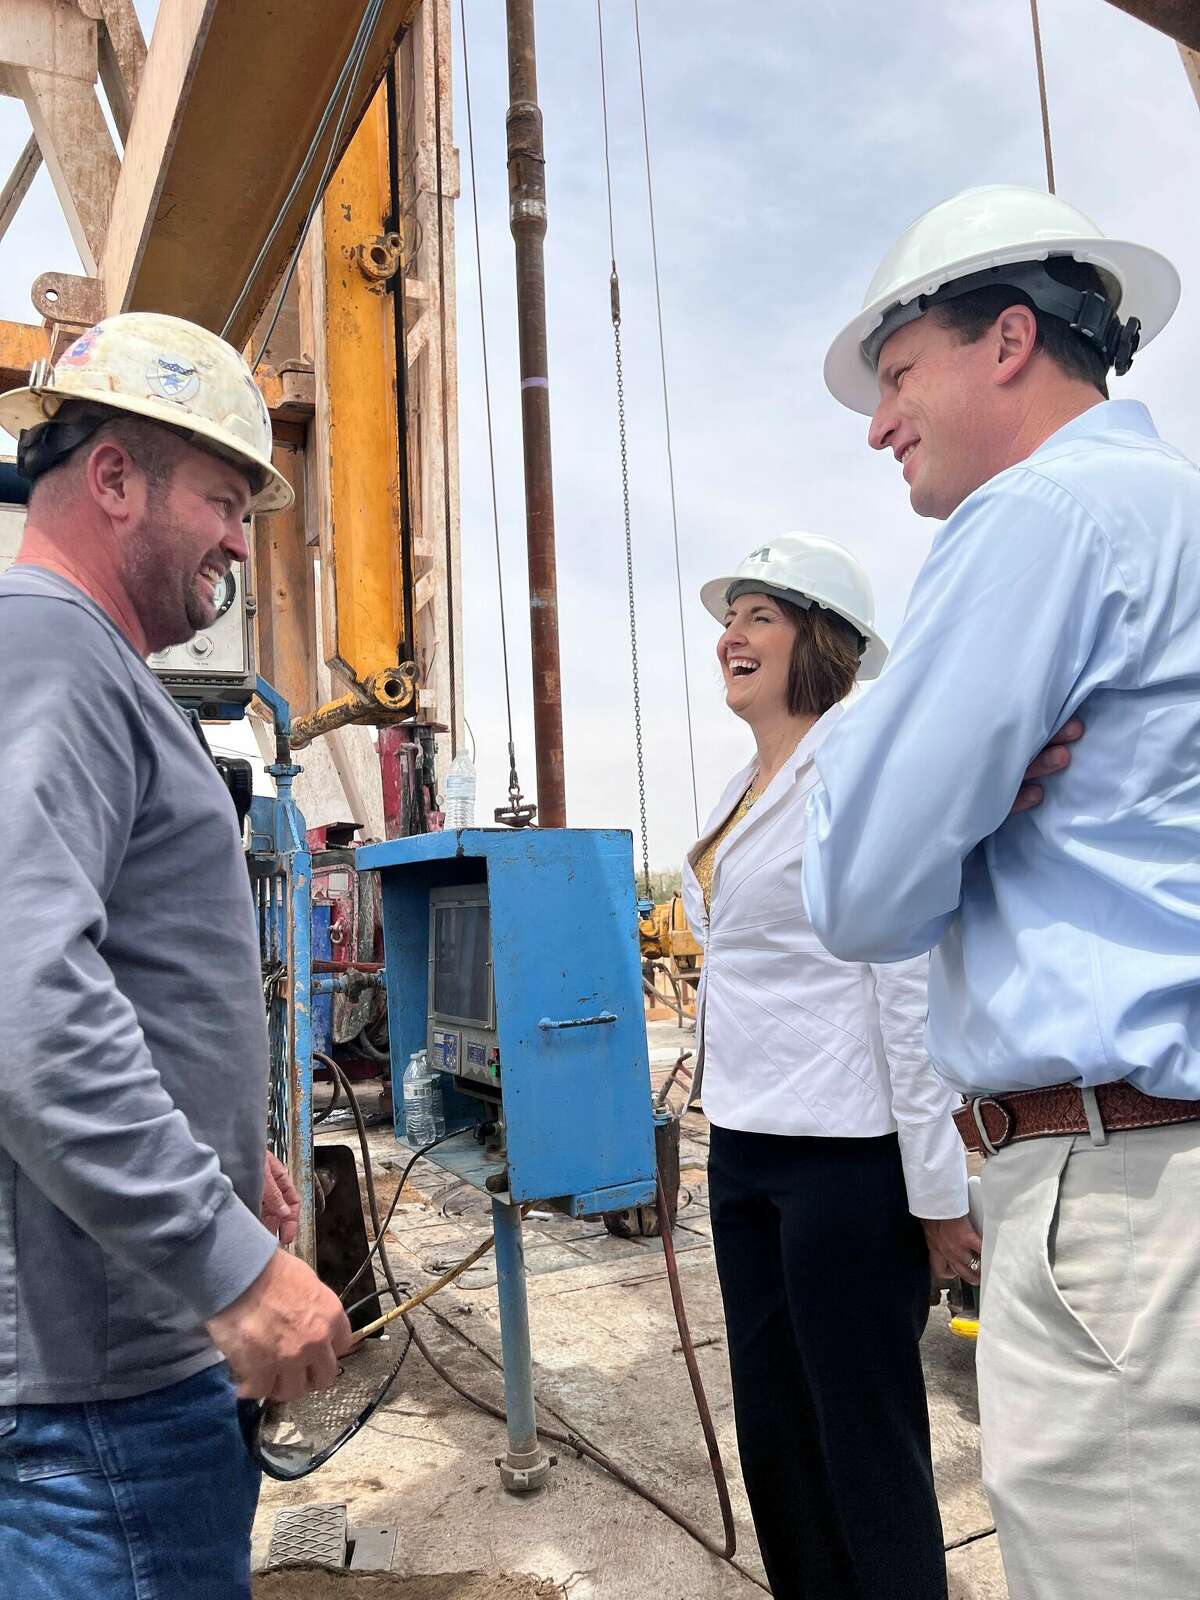 Congressman Pfluger, right, hosted Cathy McMorris Rodgers, the Ranking Member on the House Energy & Commerce Committee, for a tour of MCM Energy Partners’ rig in Midland and the Diamondback Energy Frac Site in Midland County.